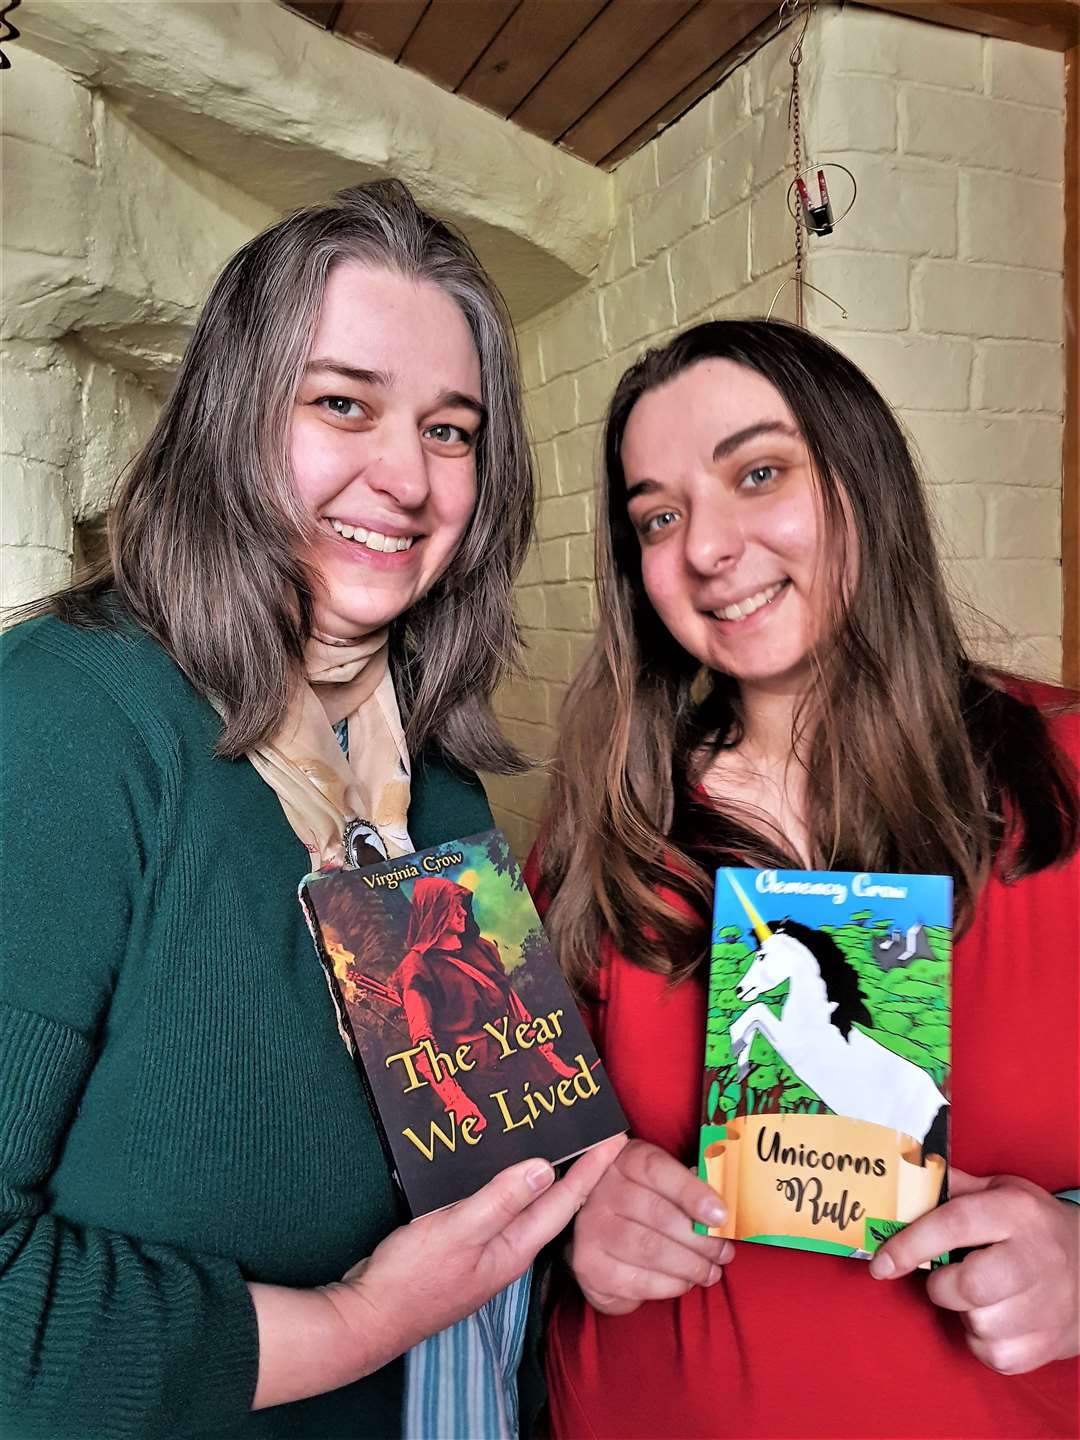 Virginia, left, with Clemency showing their new books.